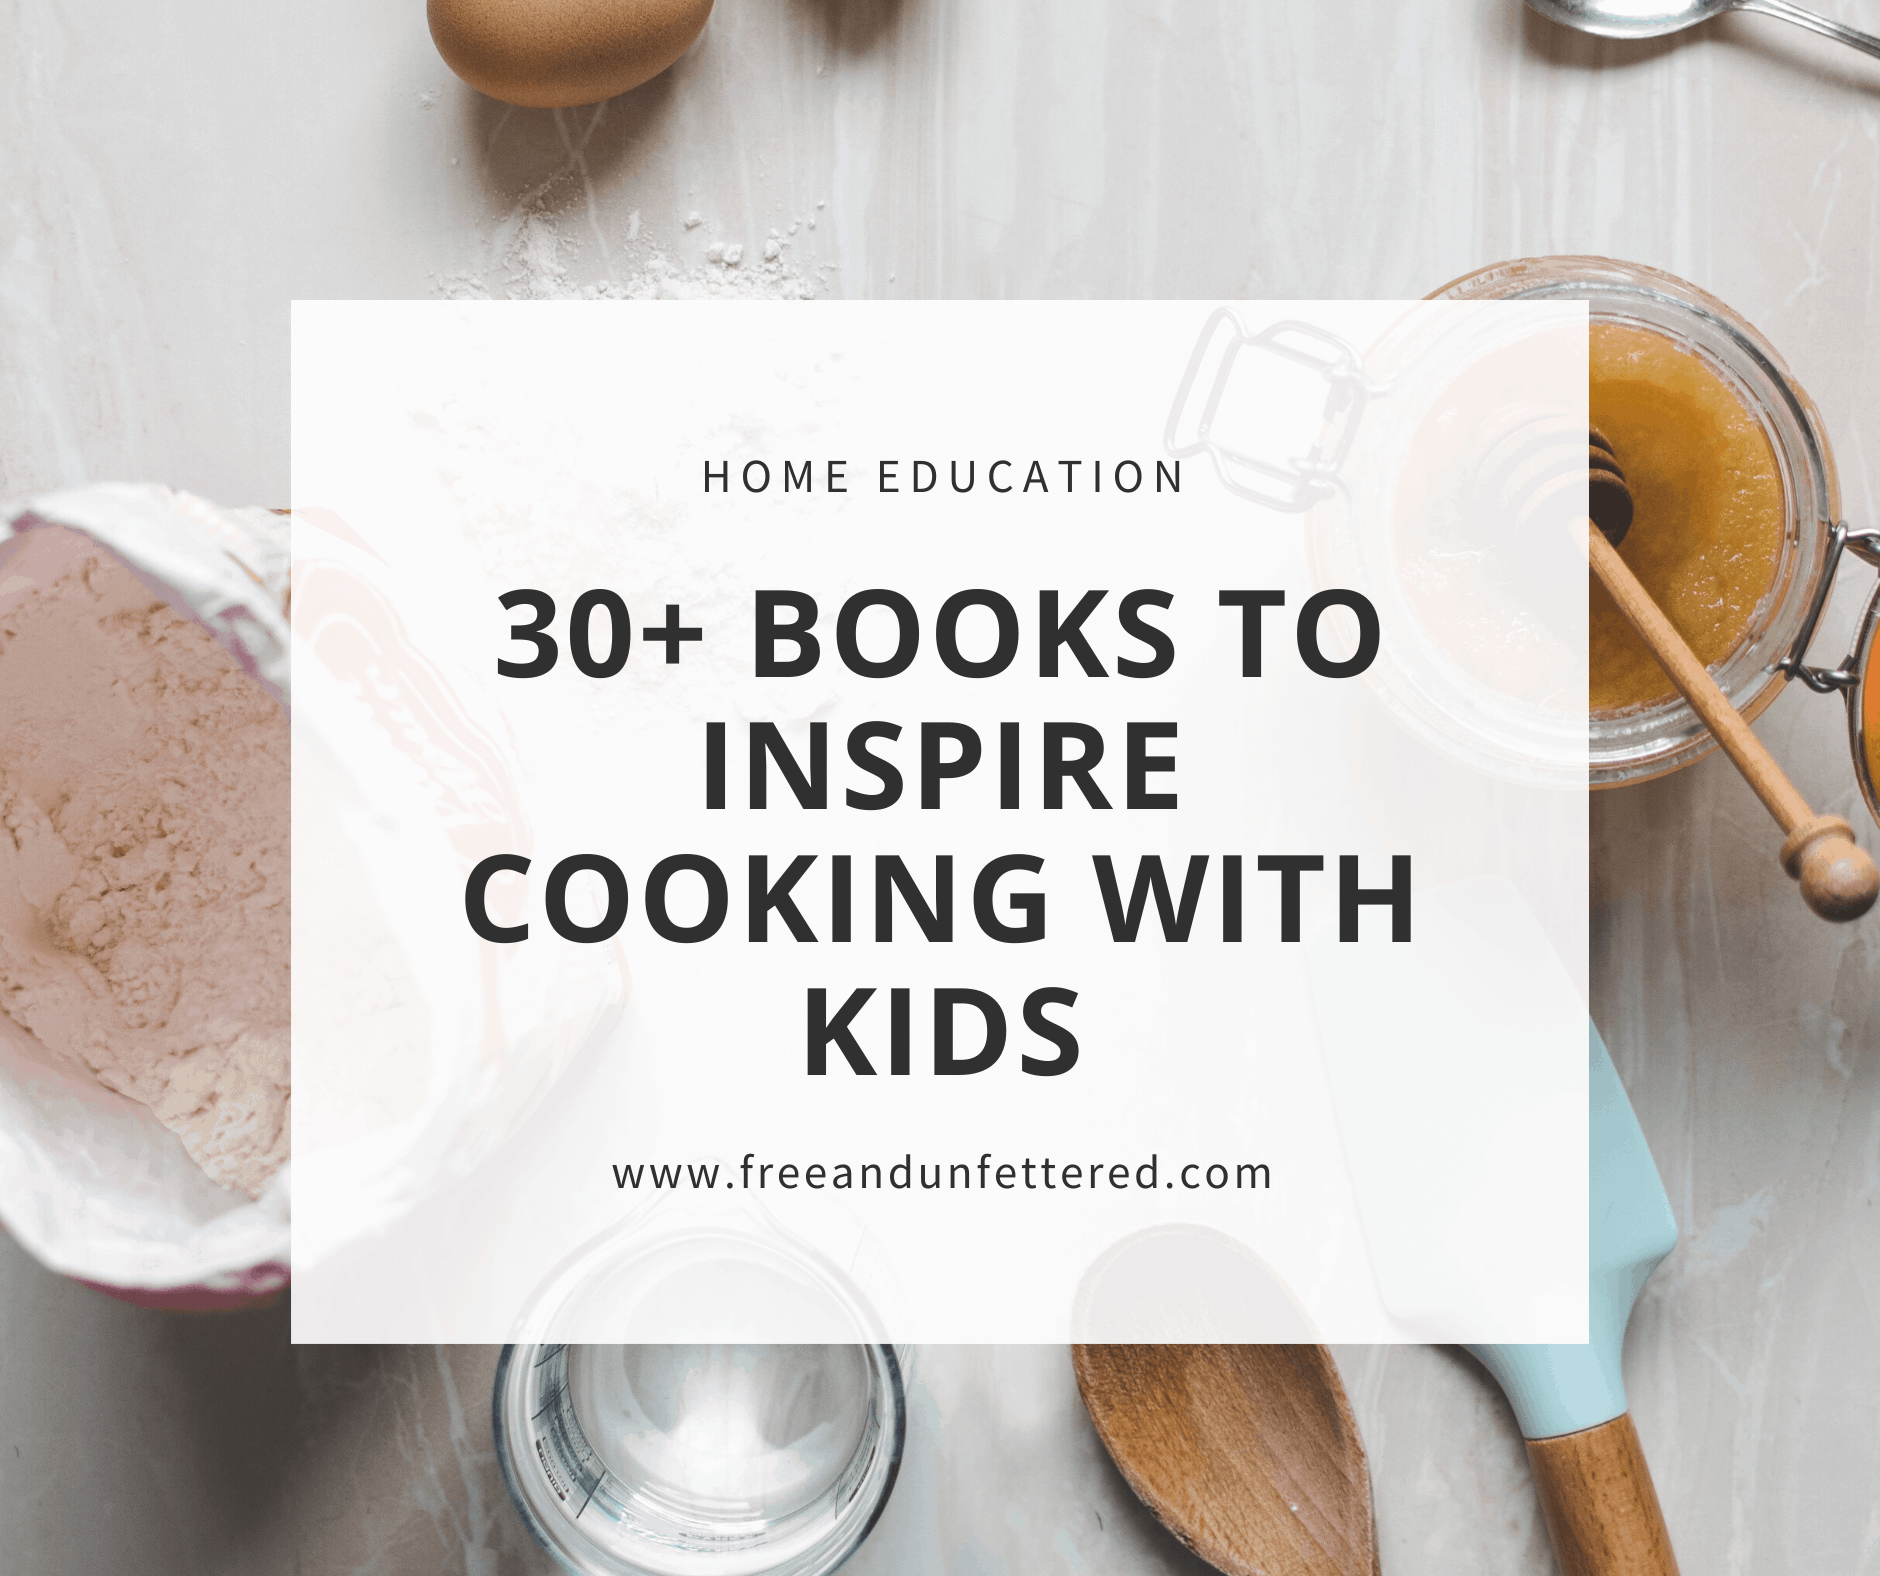 30+ Best Picture Books to Inspire Cooking with Kids